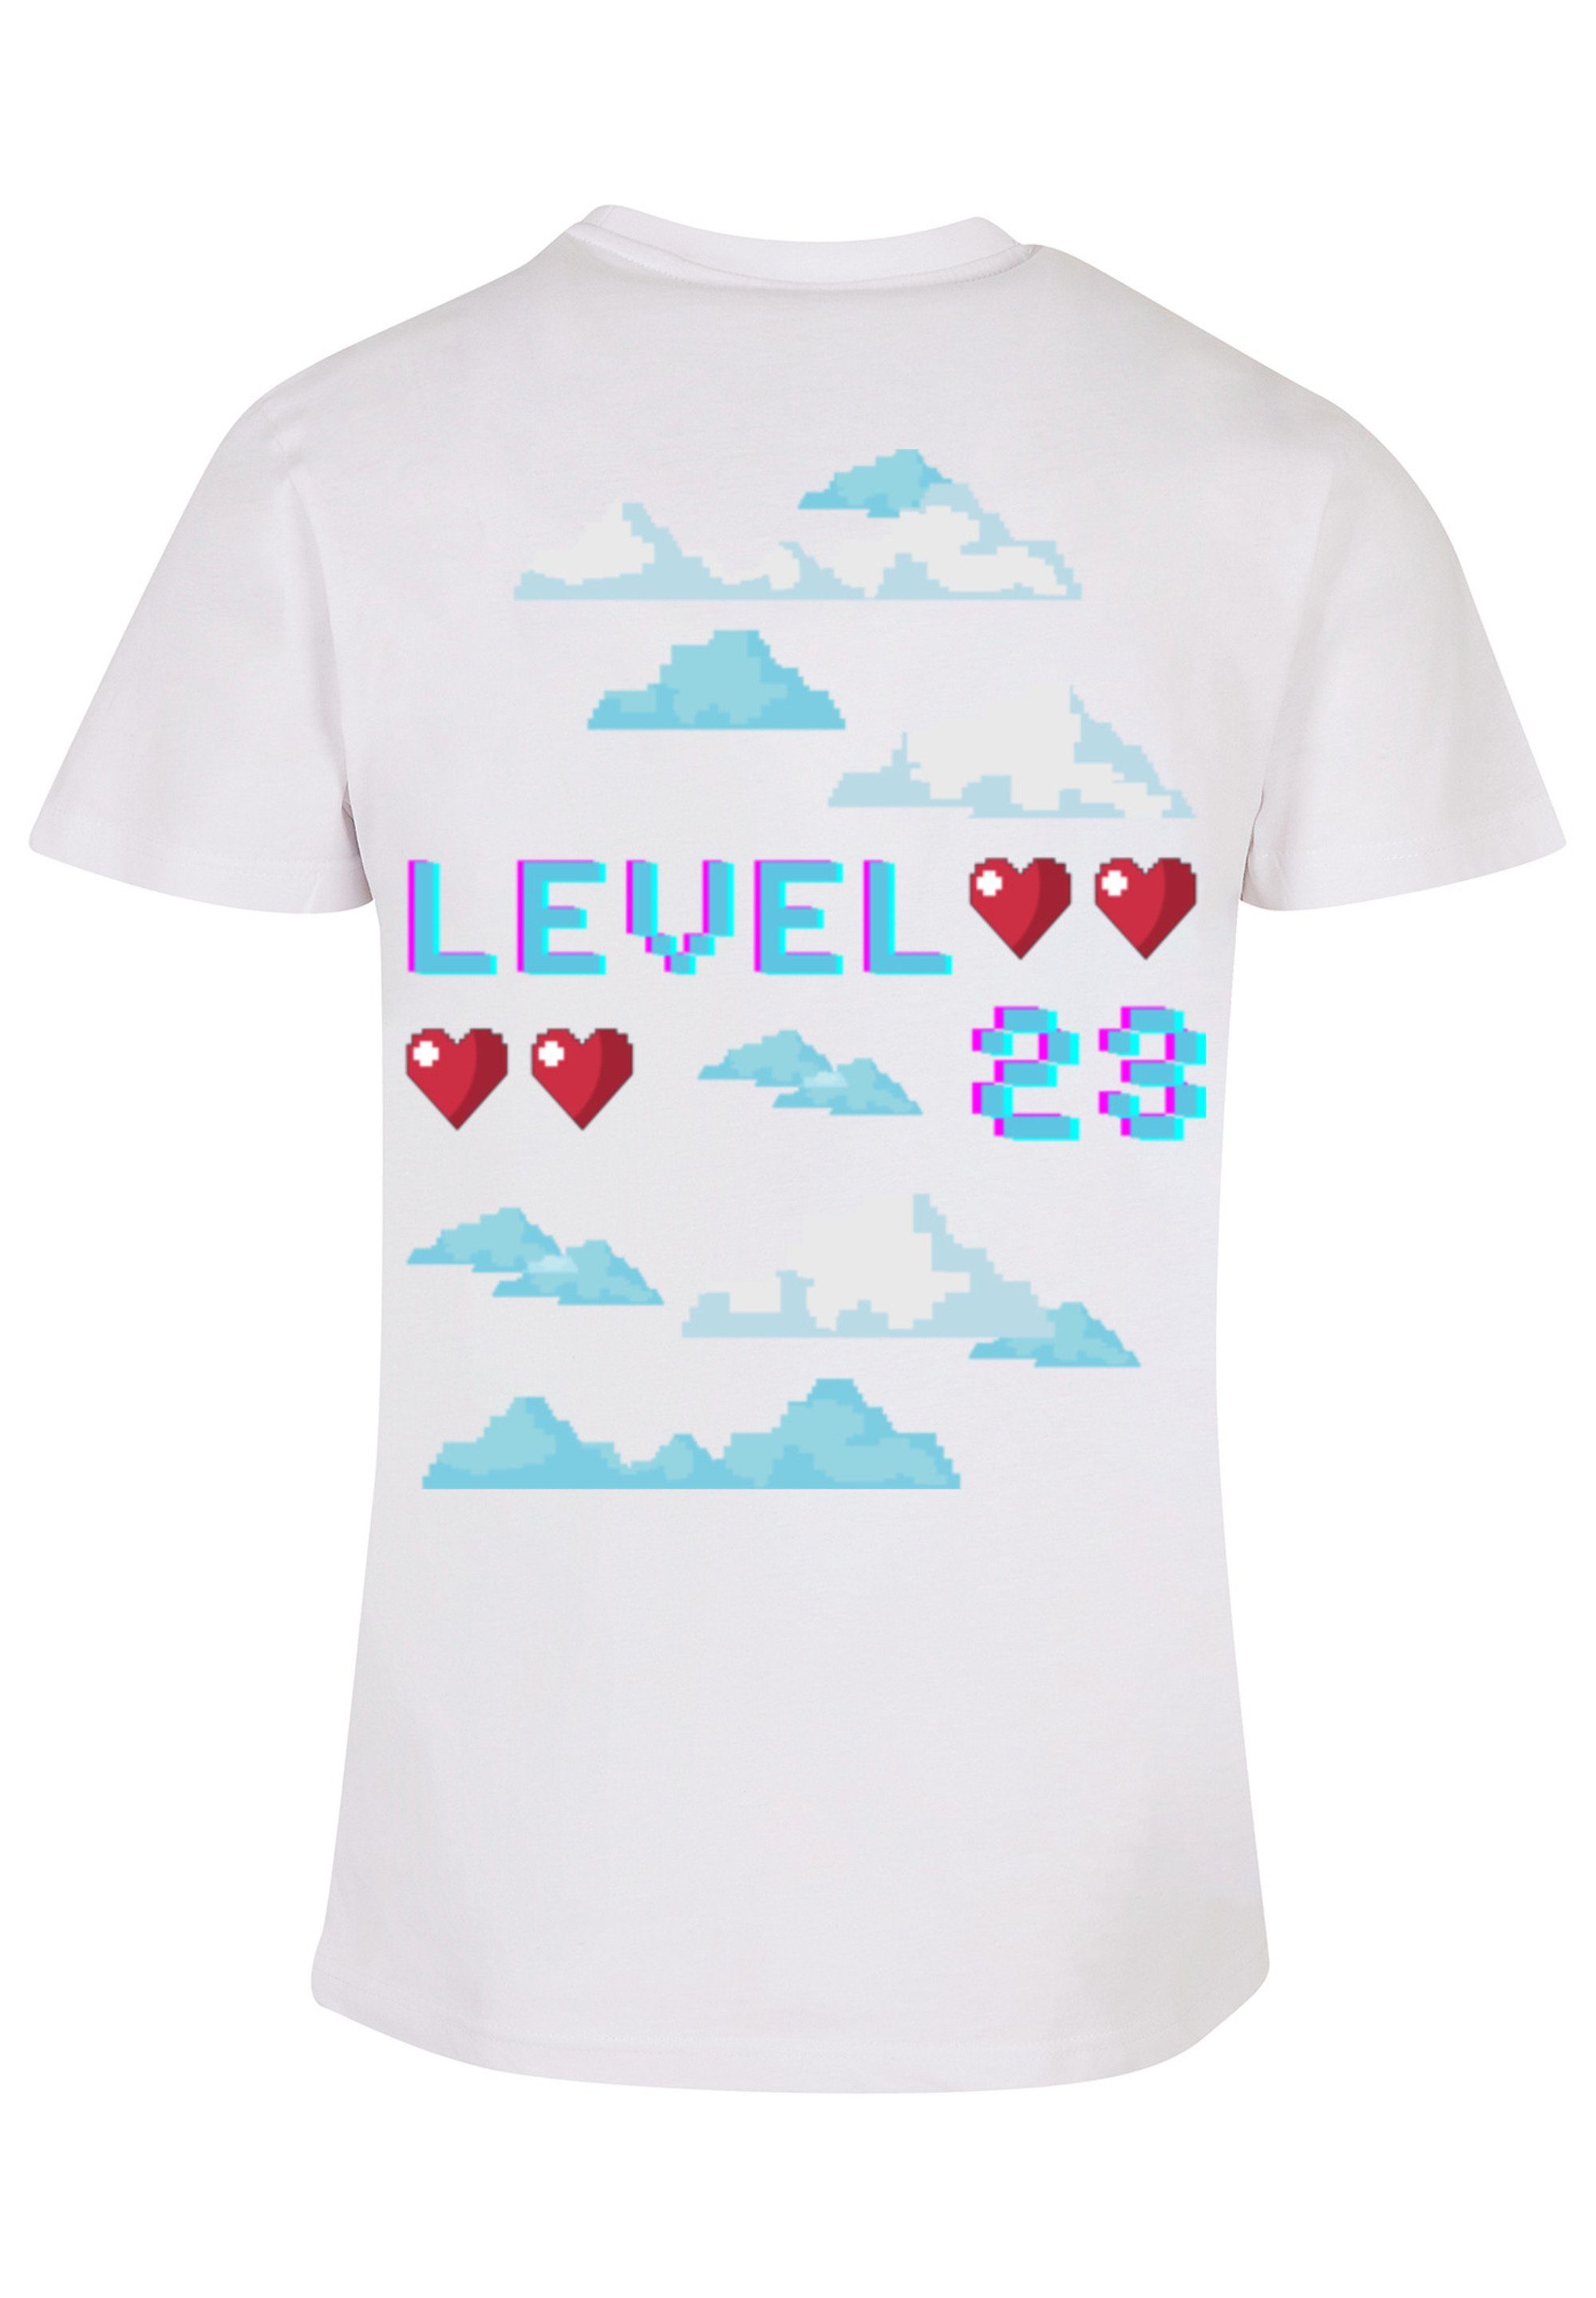 T-Shirt F4NT4STIC Up Print Level 23 Year Happy New Front